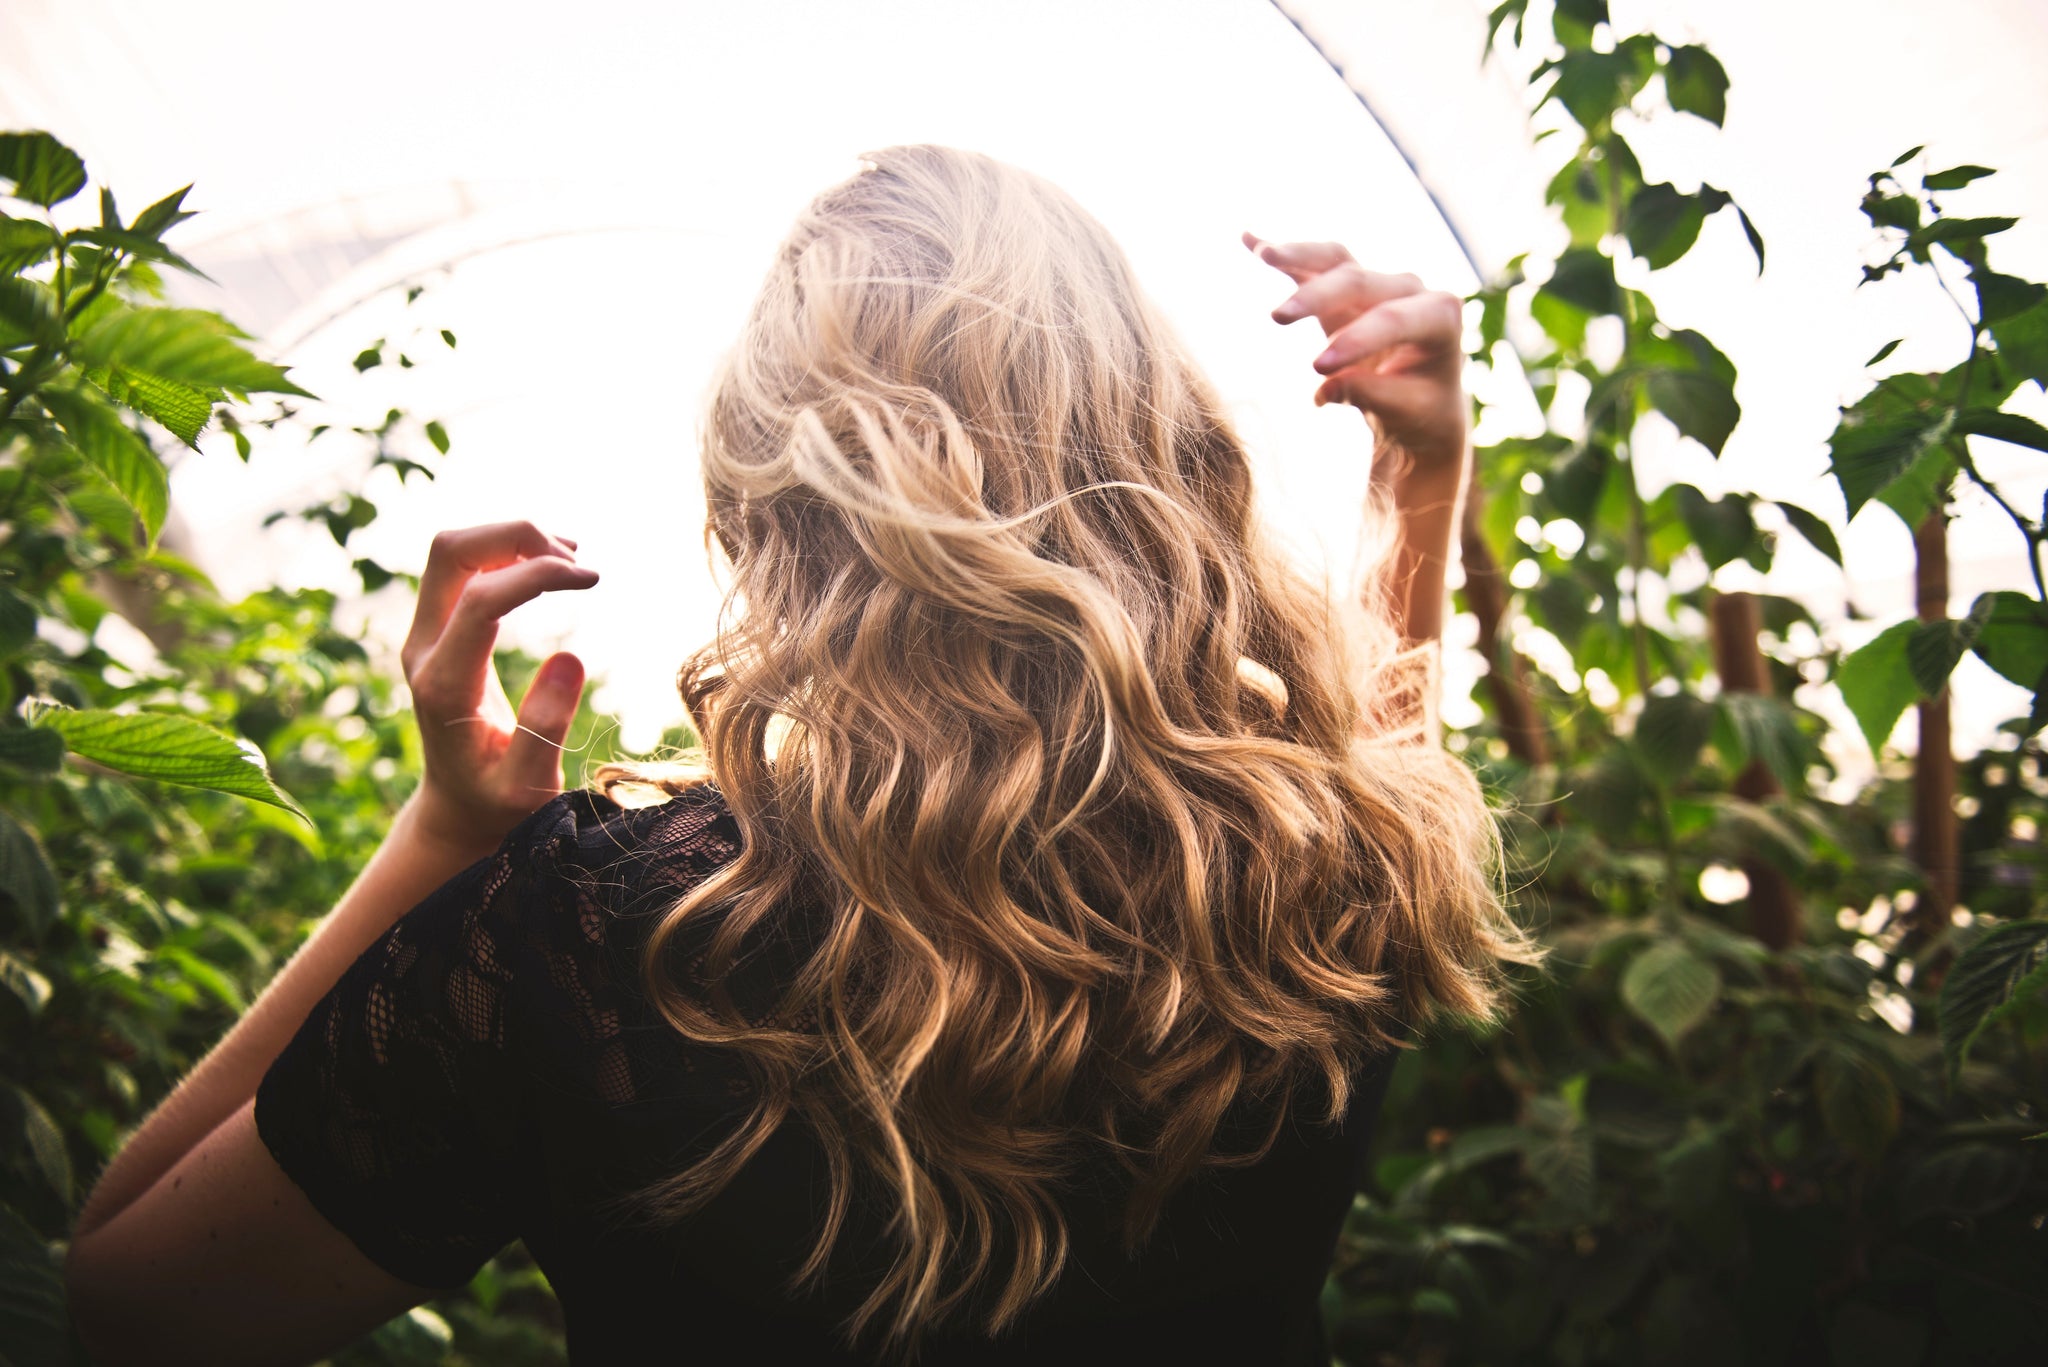 Discover the Power of Nature: The Benefits of Natural Ingredients in Hair Care